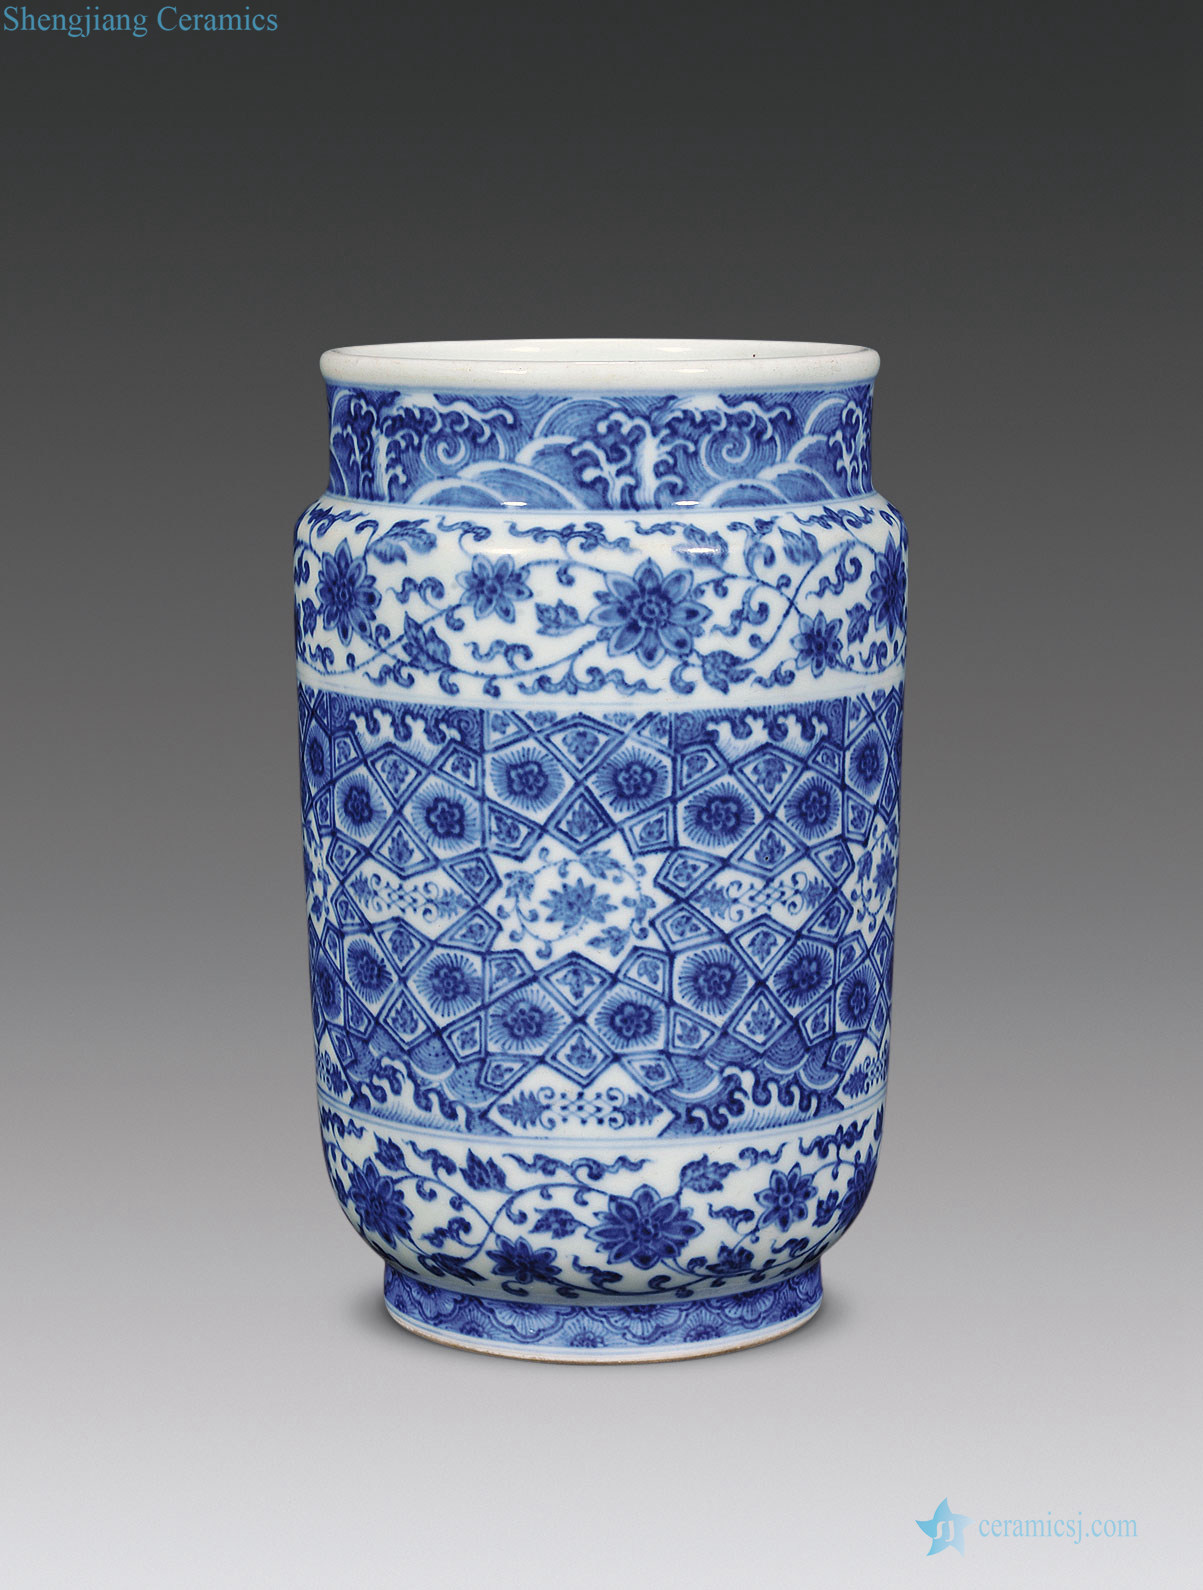 Qing dynasty blue and white flowers wen zhuang pot